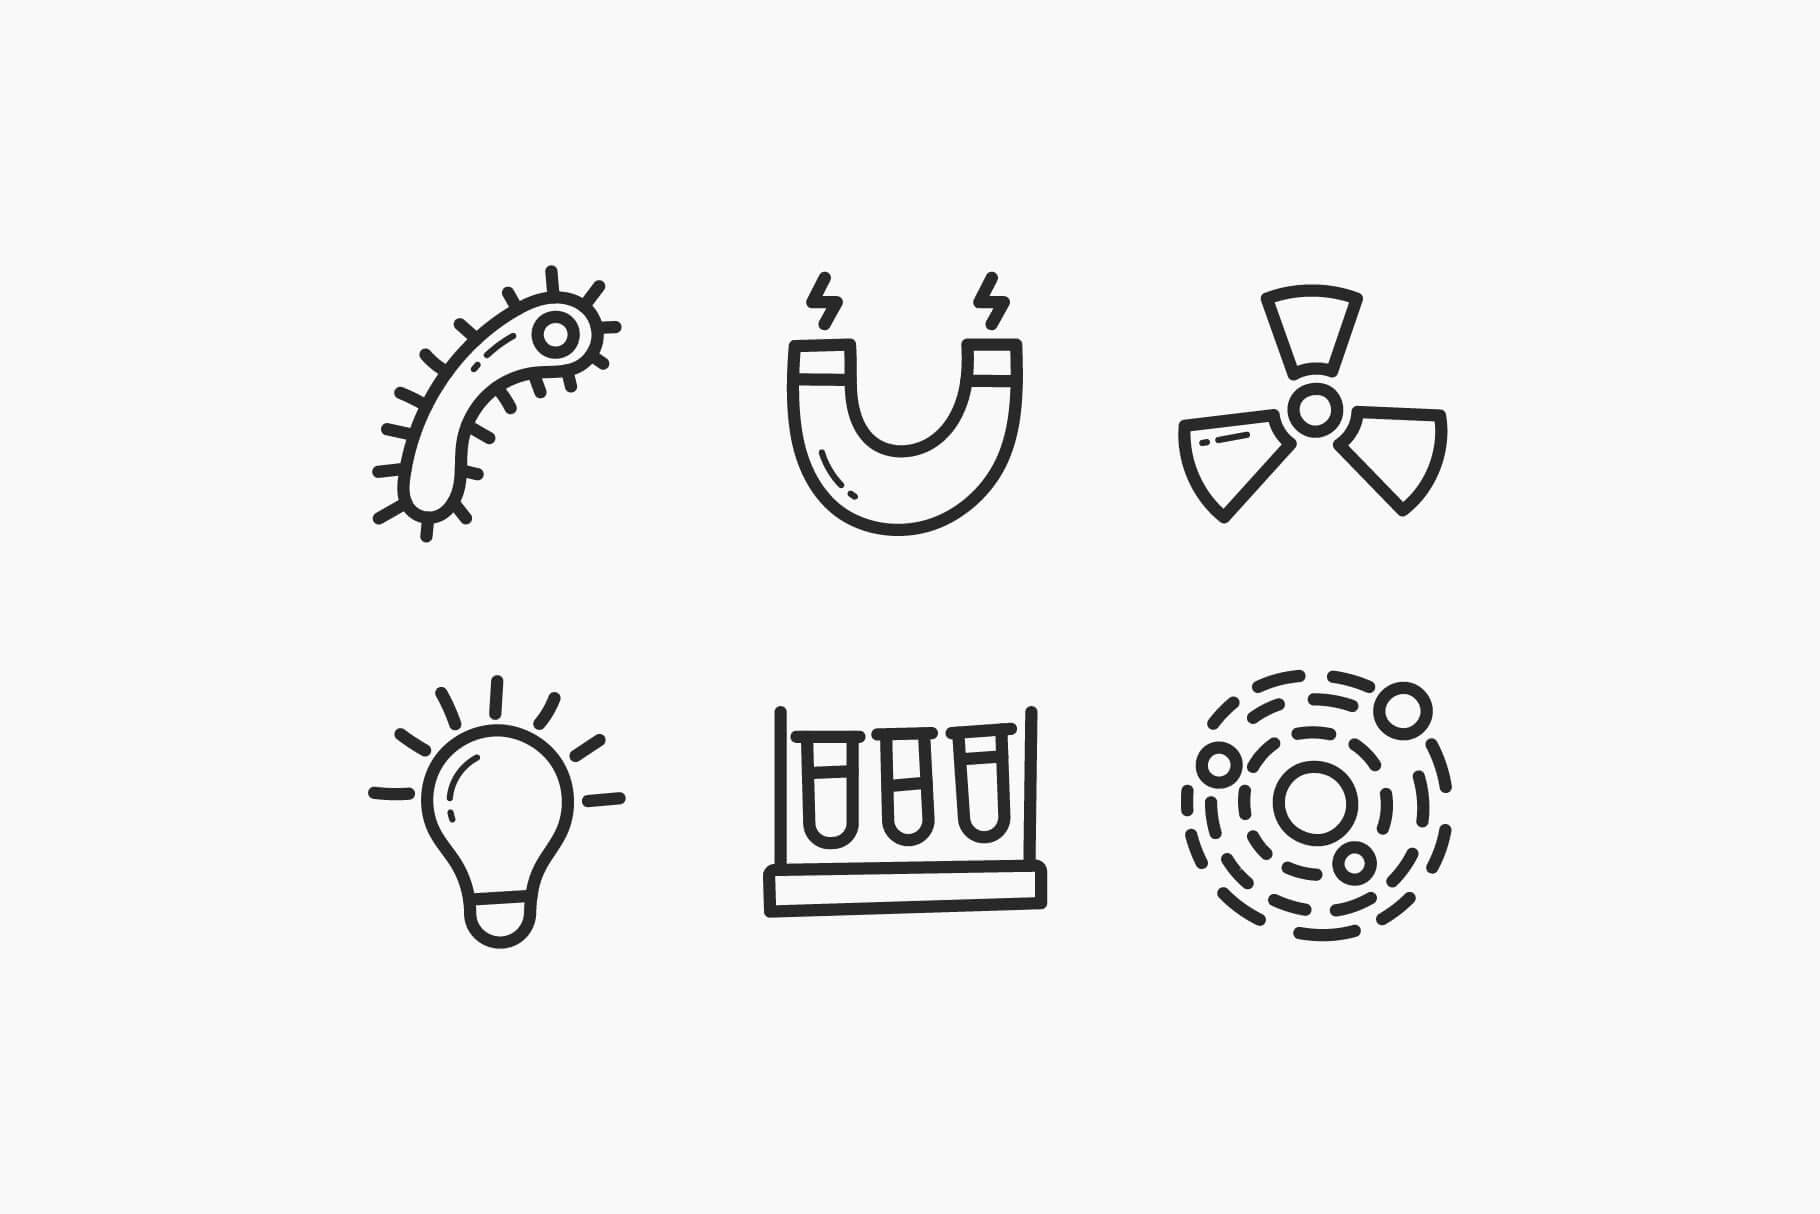 6 small icons related to chemistry.